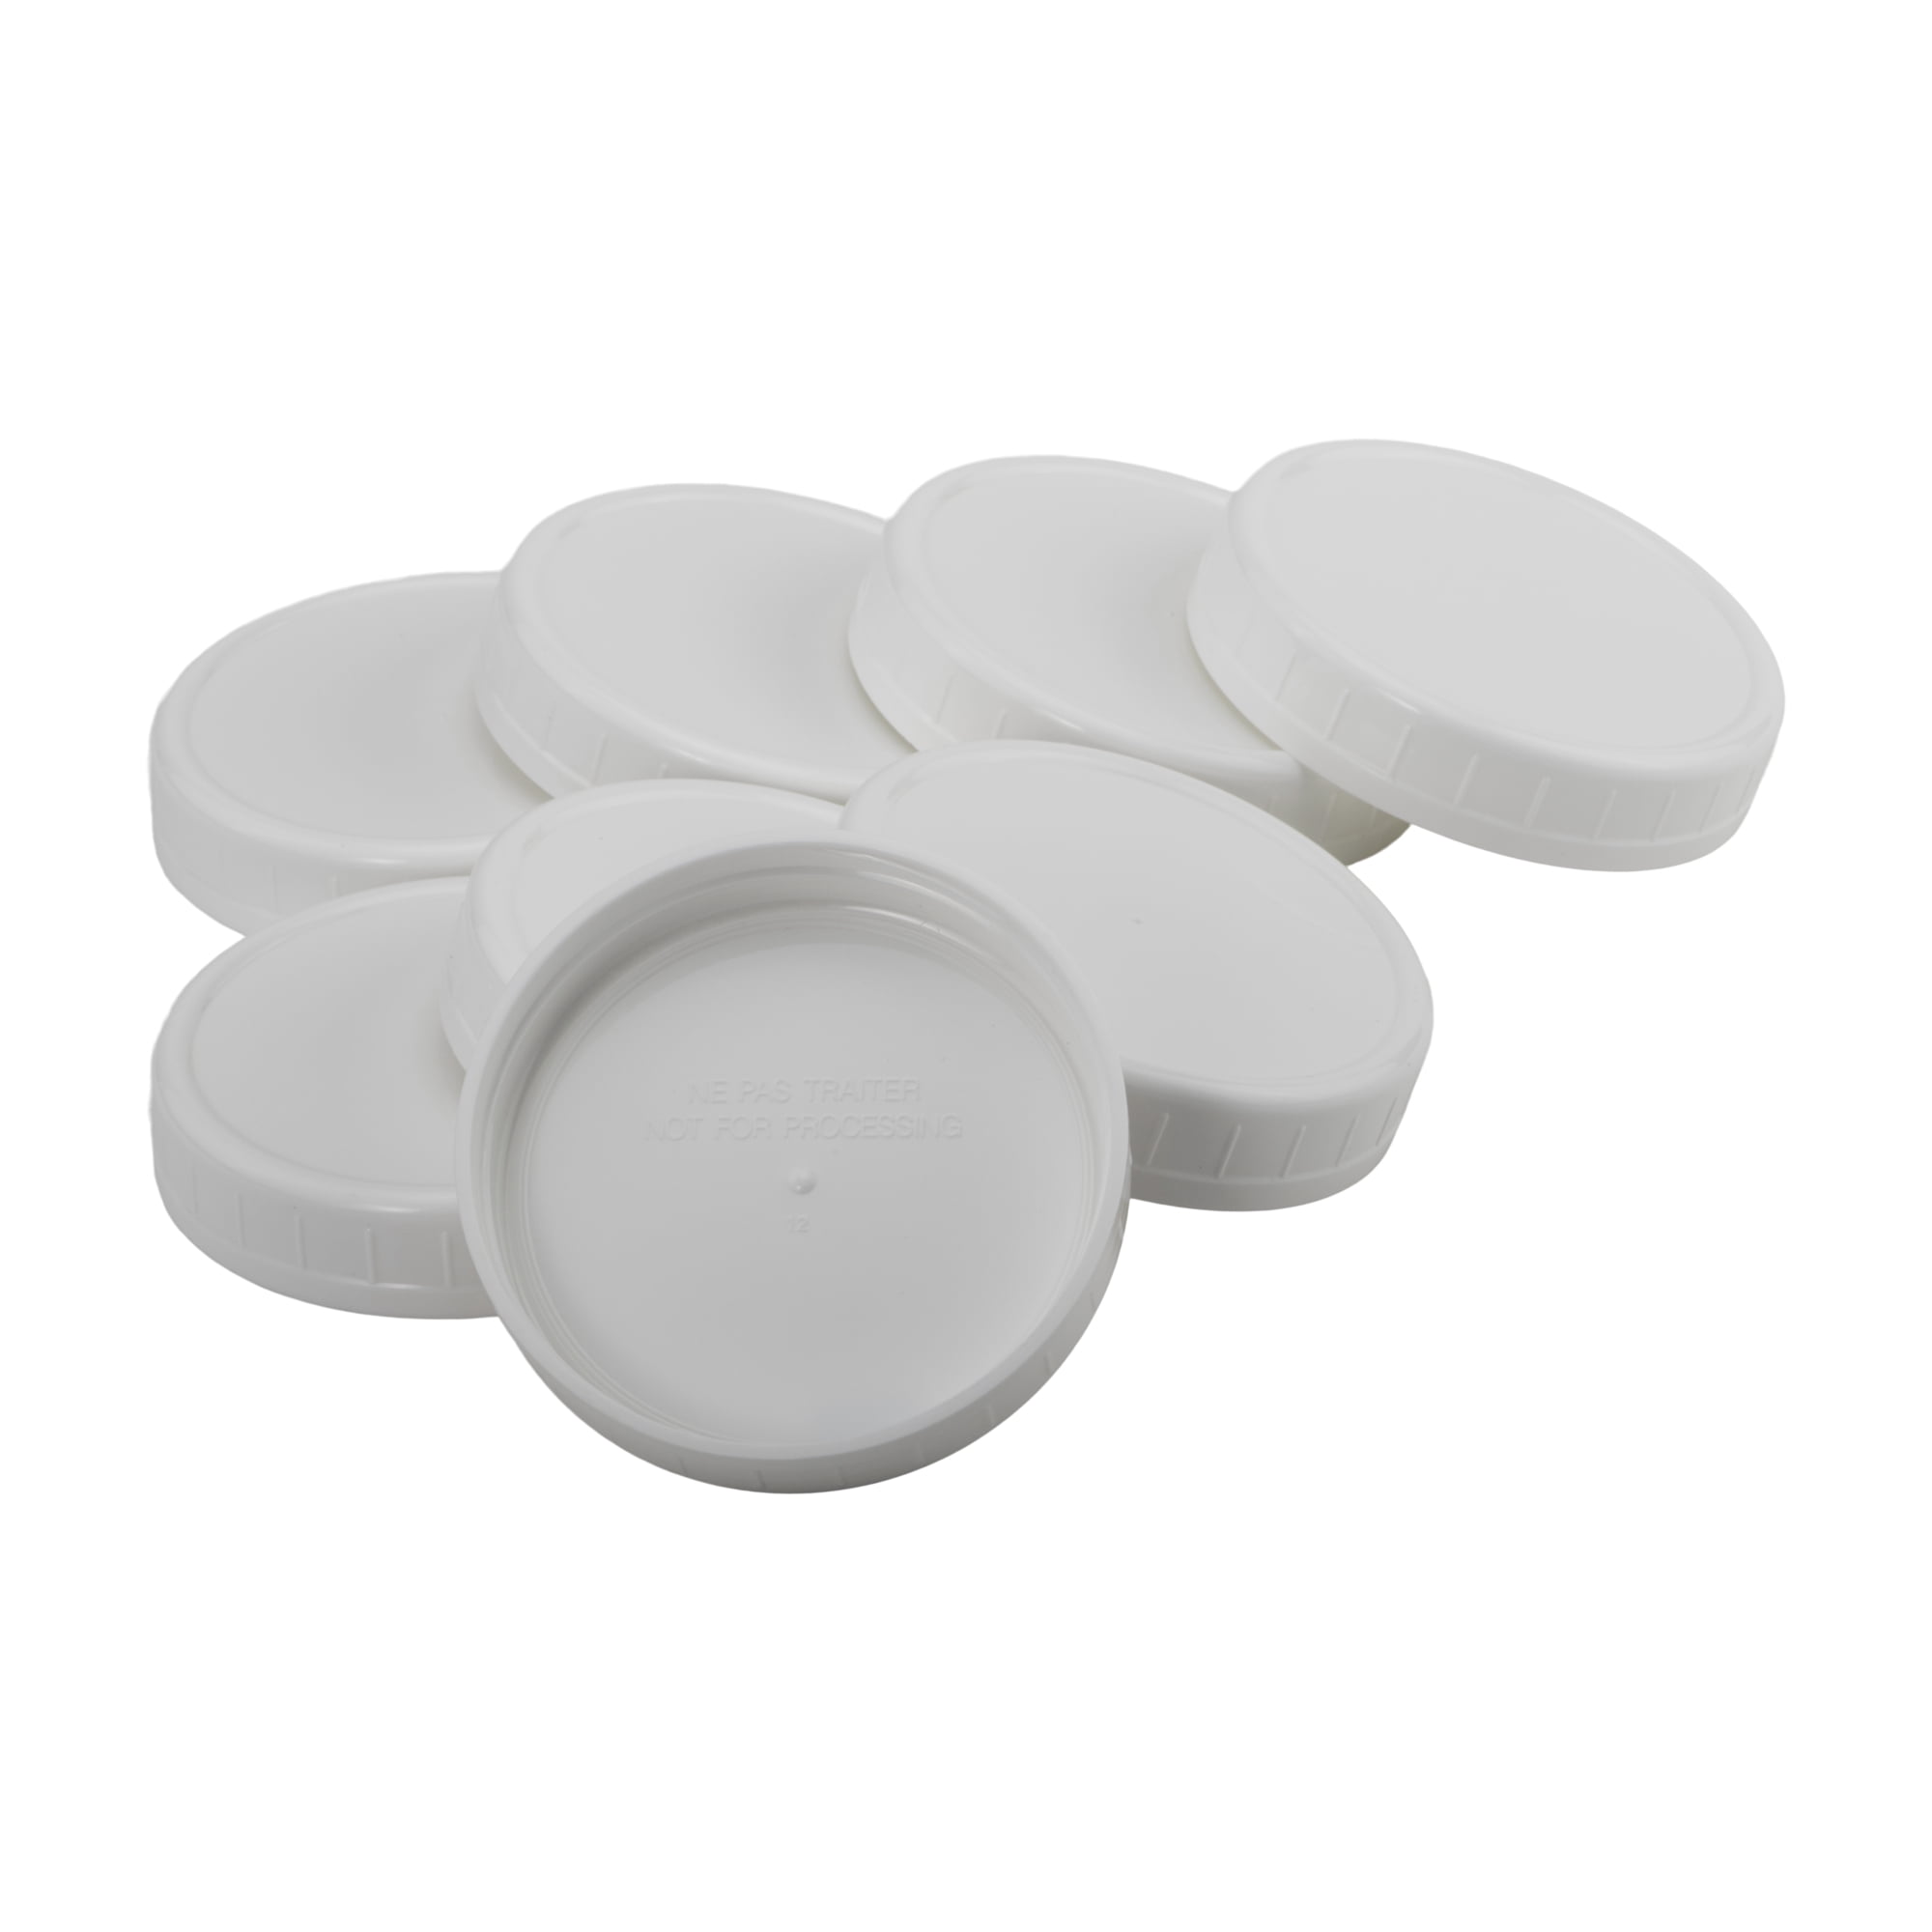 Wide-Mouth Reusable Plastic Lids for Canning Jars Mainstays 3.62 dia x .75 H 8 Count 